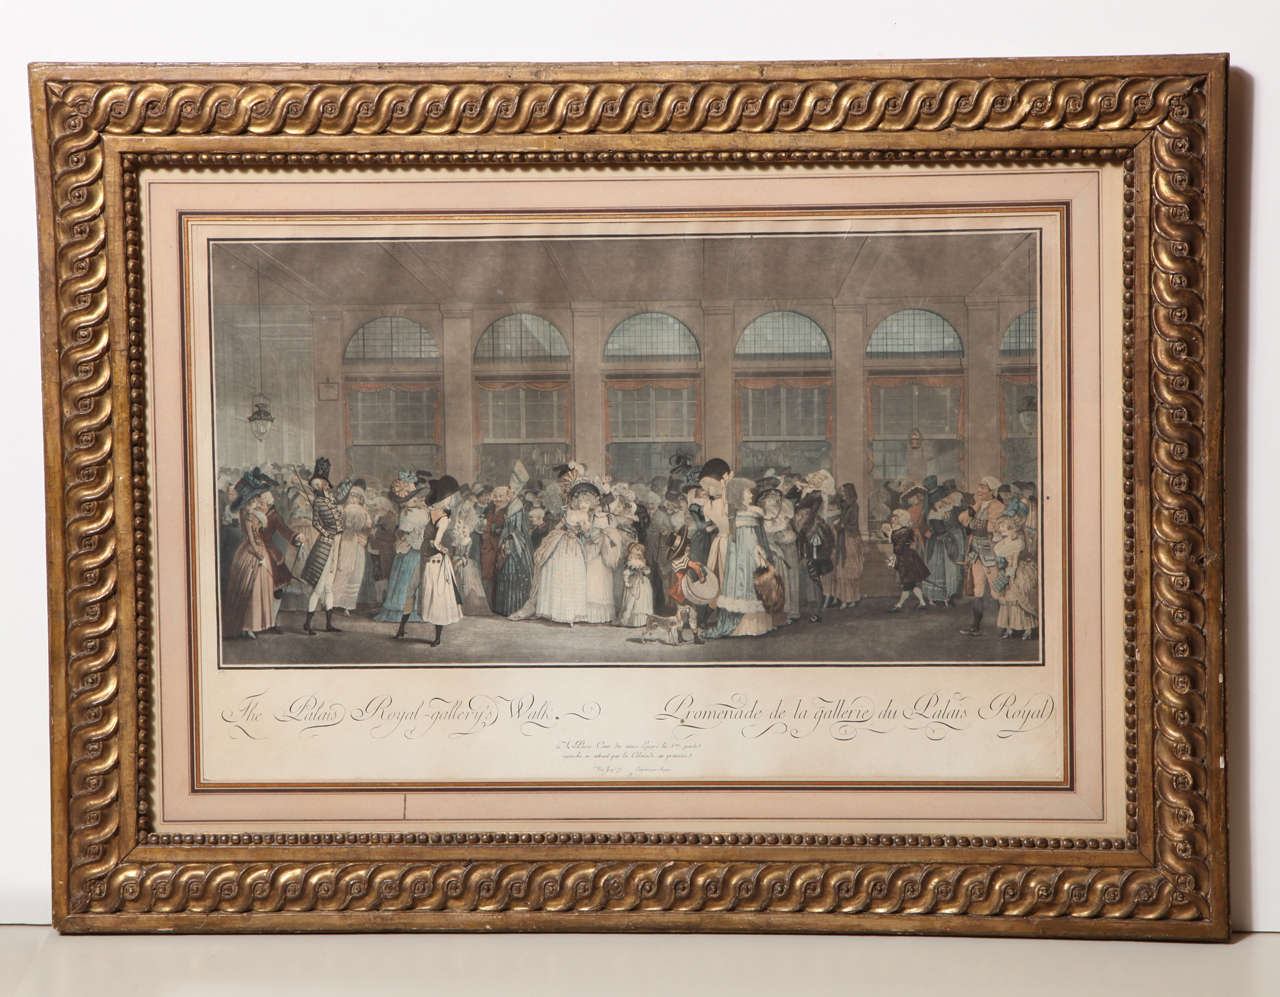 Famous for its smart shops, the Palais Royal was a place to see and be seen in 18th century Paris, just as it is today. Then, prints were typically mounted in portfolios, but this one, printed in four-colors, was a technical tour de force and made